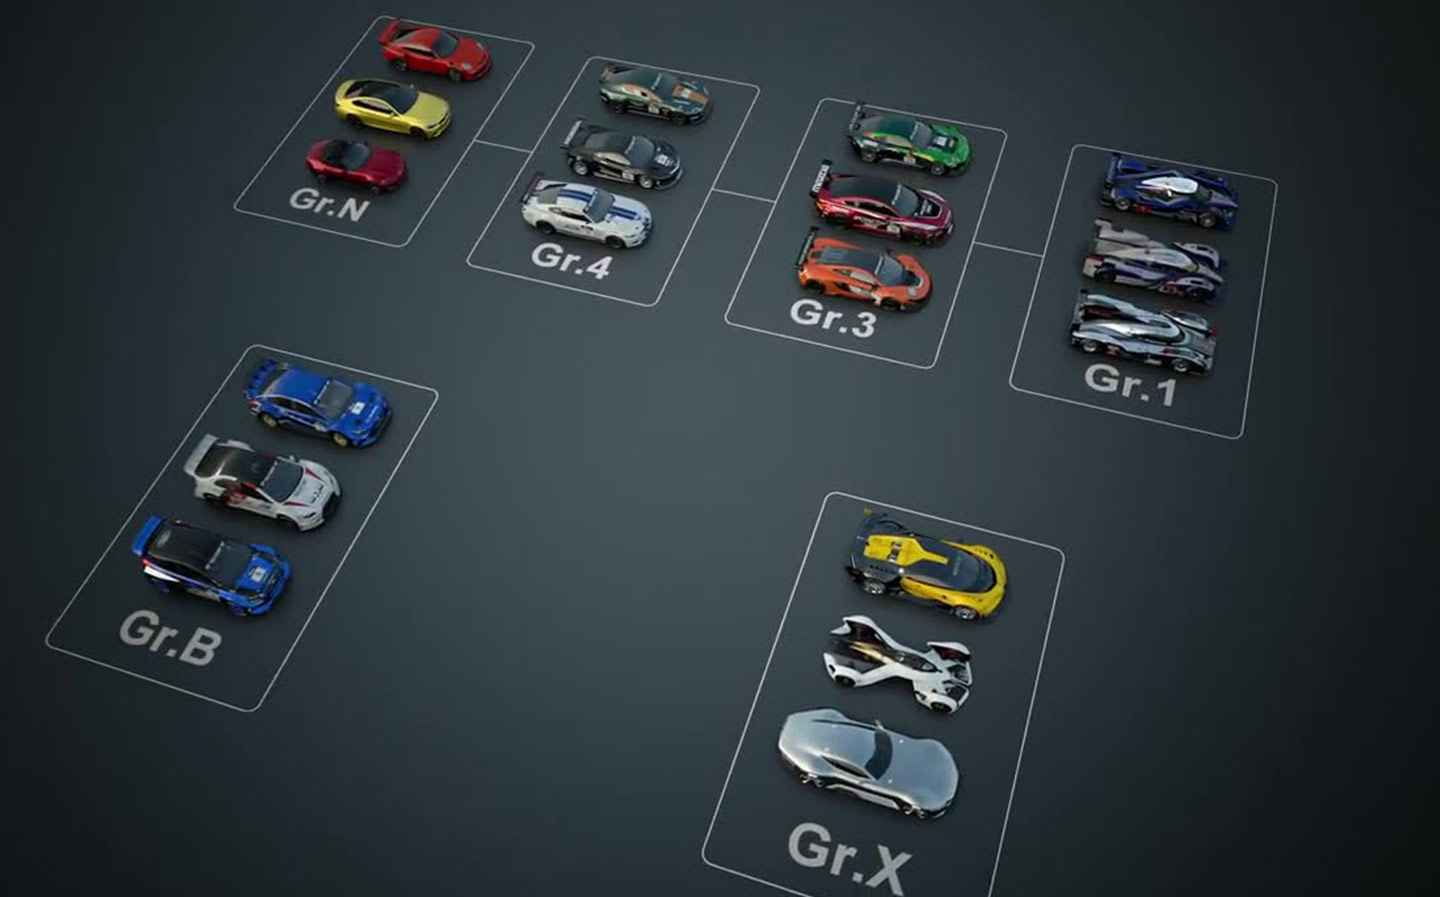 GT vehicle list by category